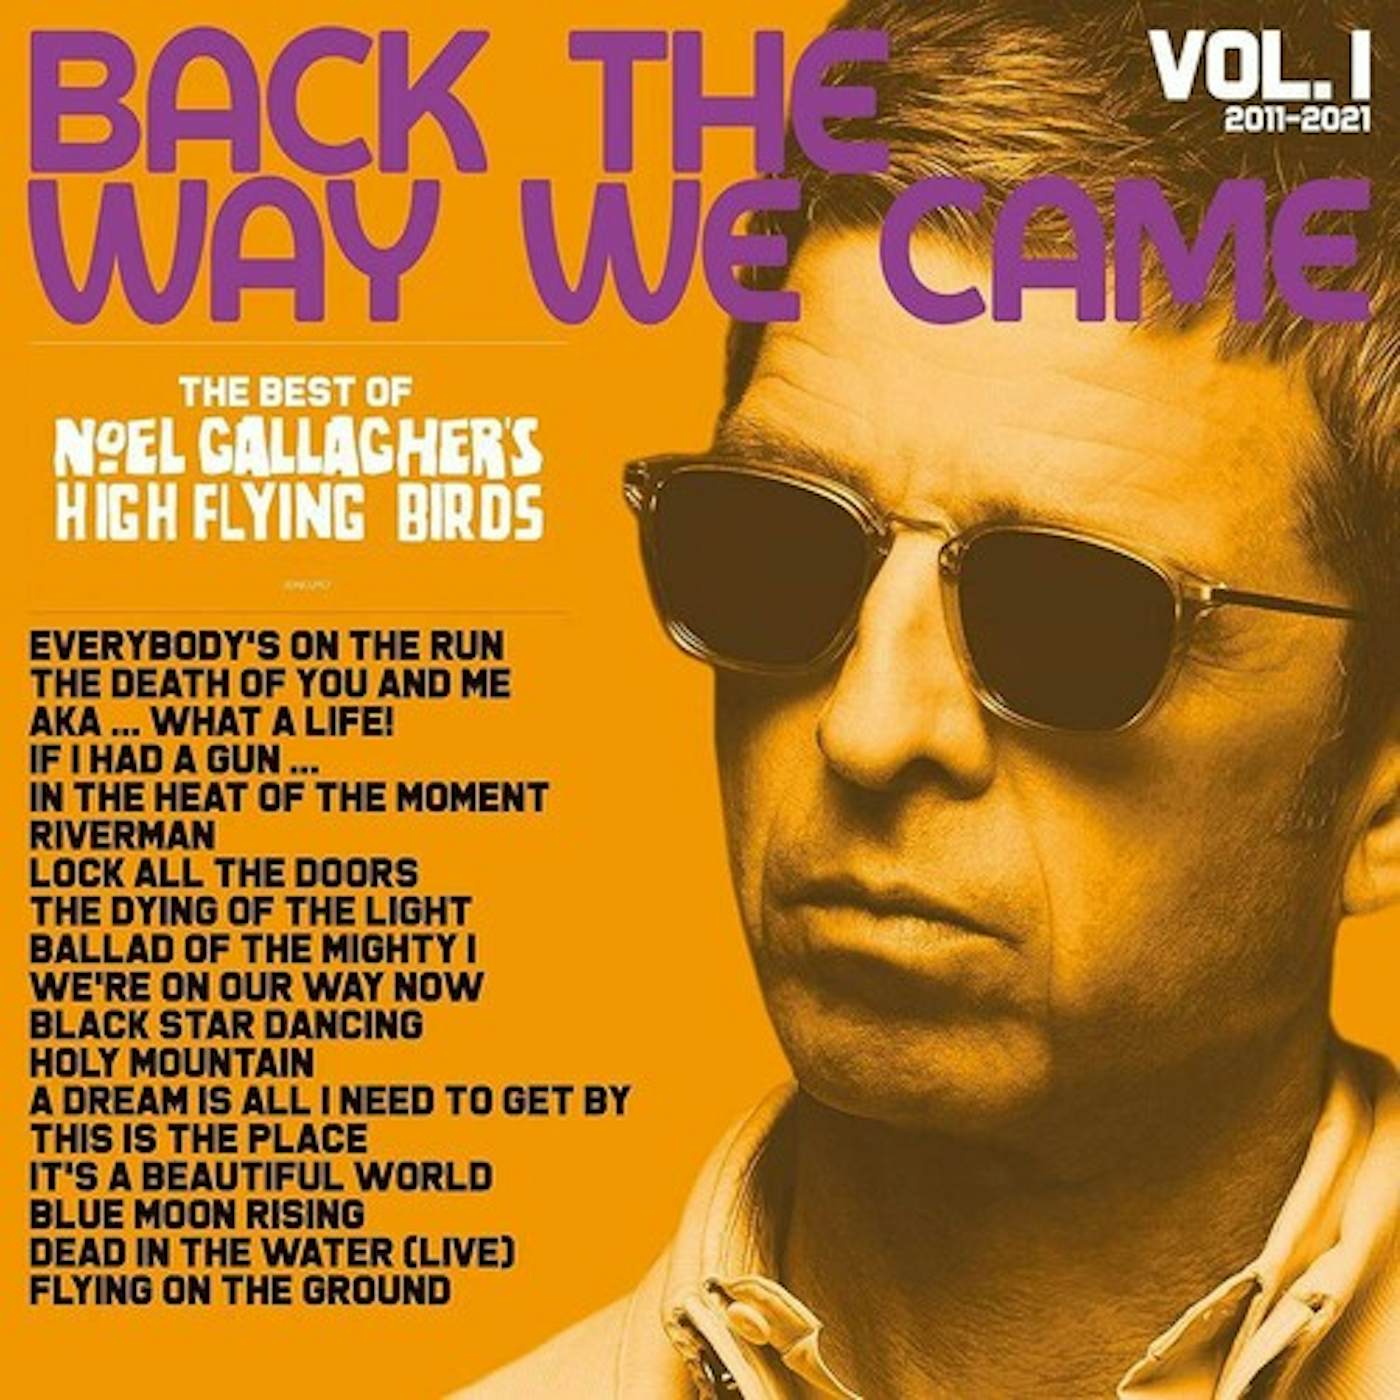 Noel Gallagher's High Flying Birds BACK THE WAY WE CAME: VOL. 1 (2011 - 2021) CD